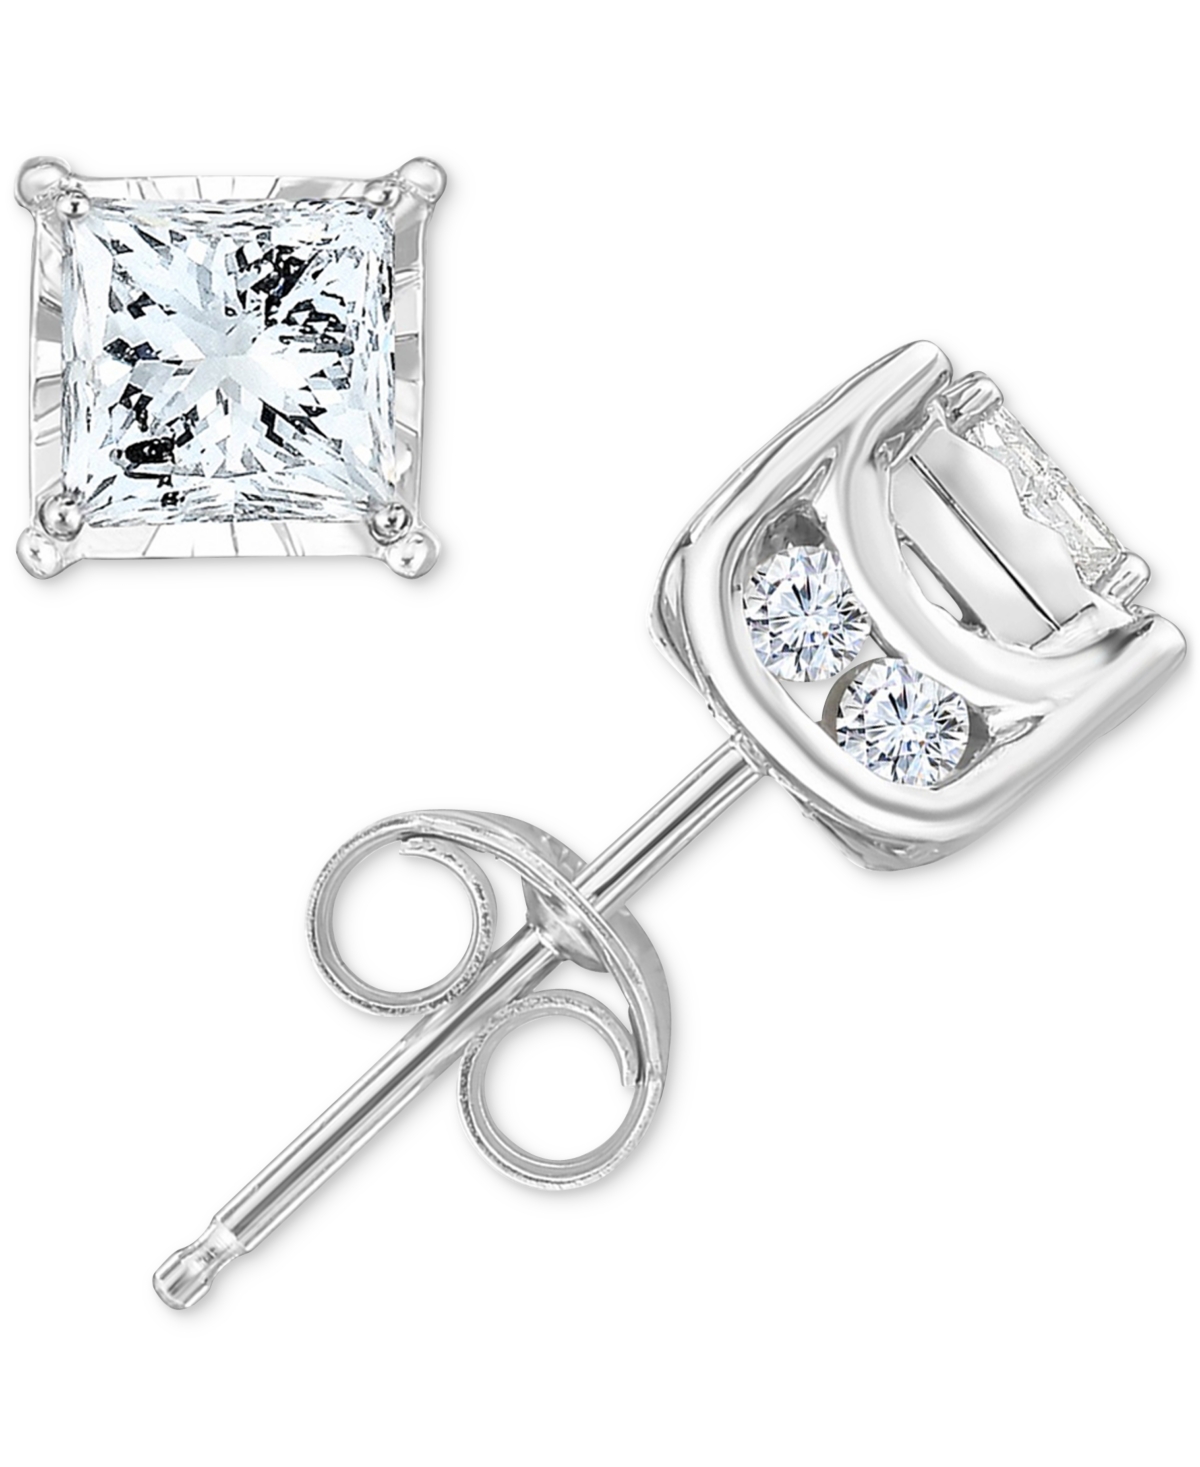 Diamond Princess Stud Earrings (3/4 ct. t.w.) in 14k White Gold, Gold or Rose Gold - Rose Gold